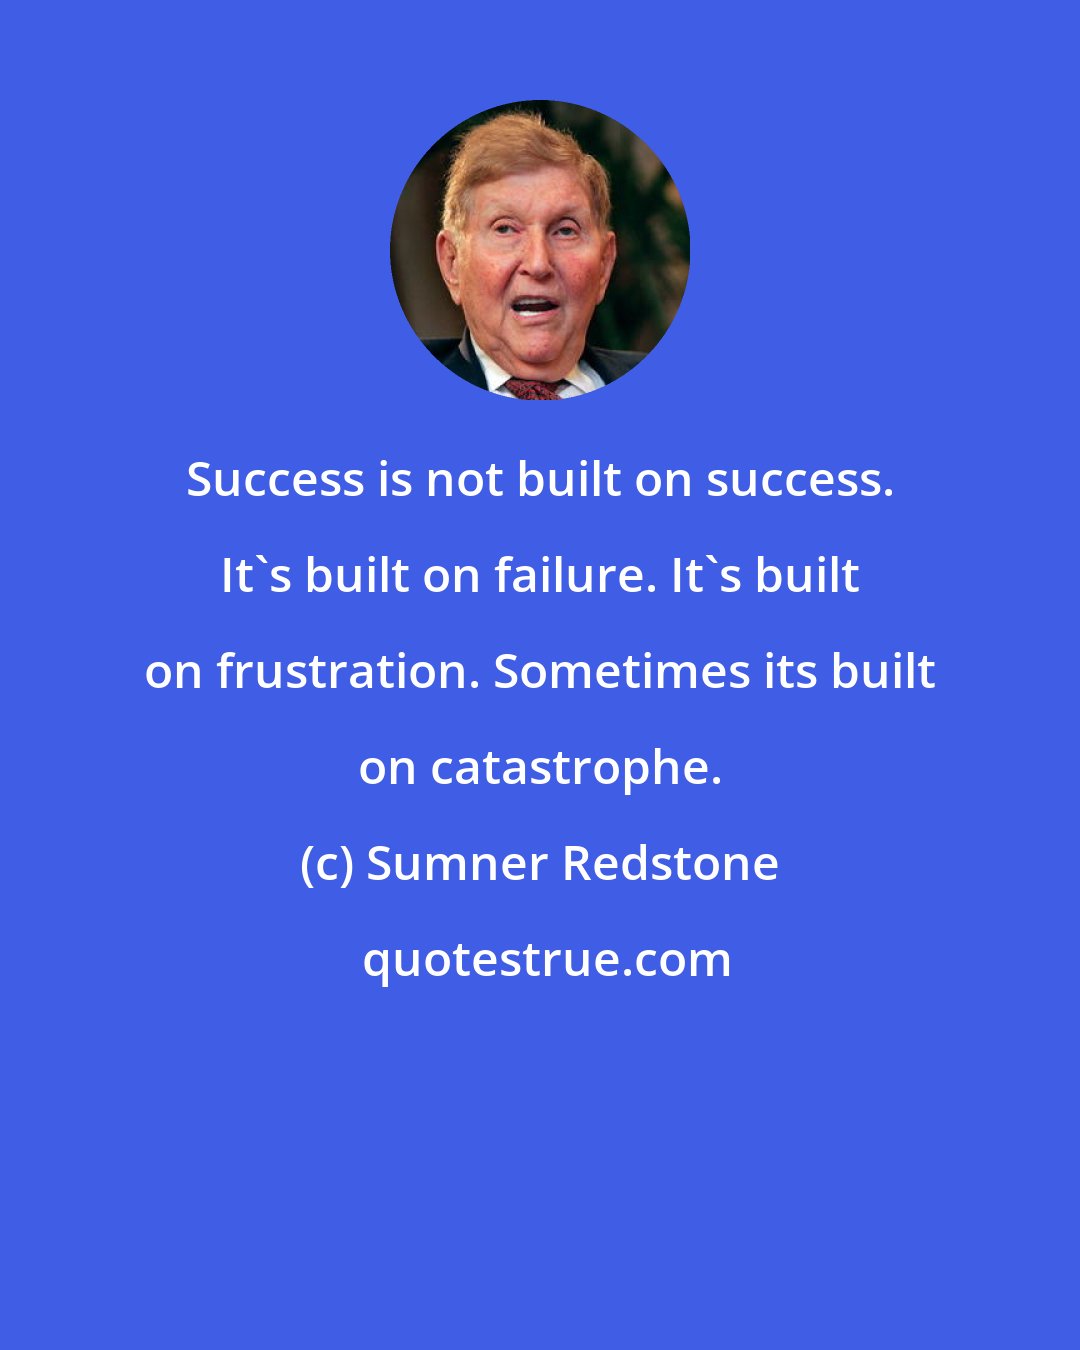 Sumner Redstone: Success is not built on success. It's built on failure. It's built on frustration. Sometimes its built on catastrophe.